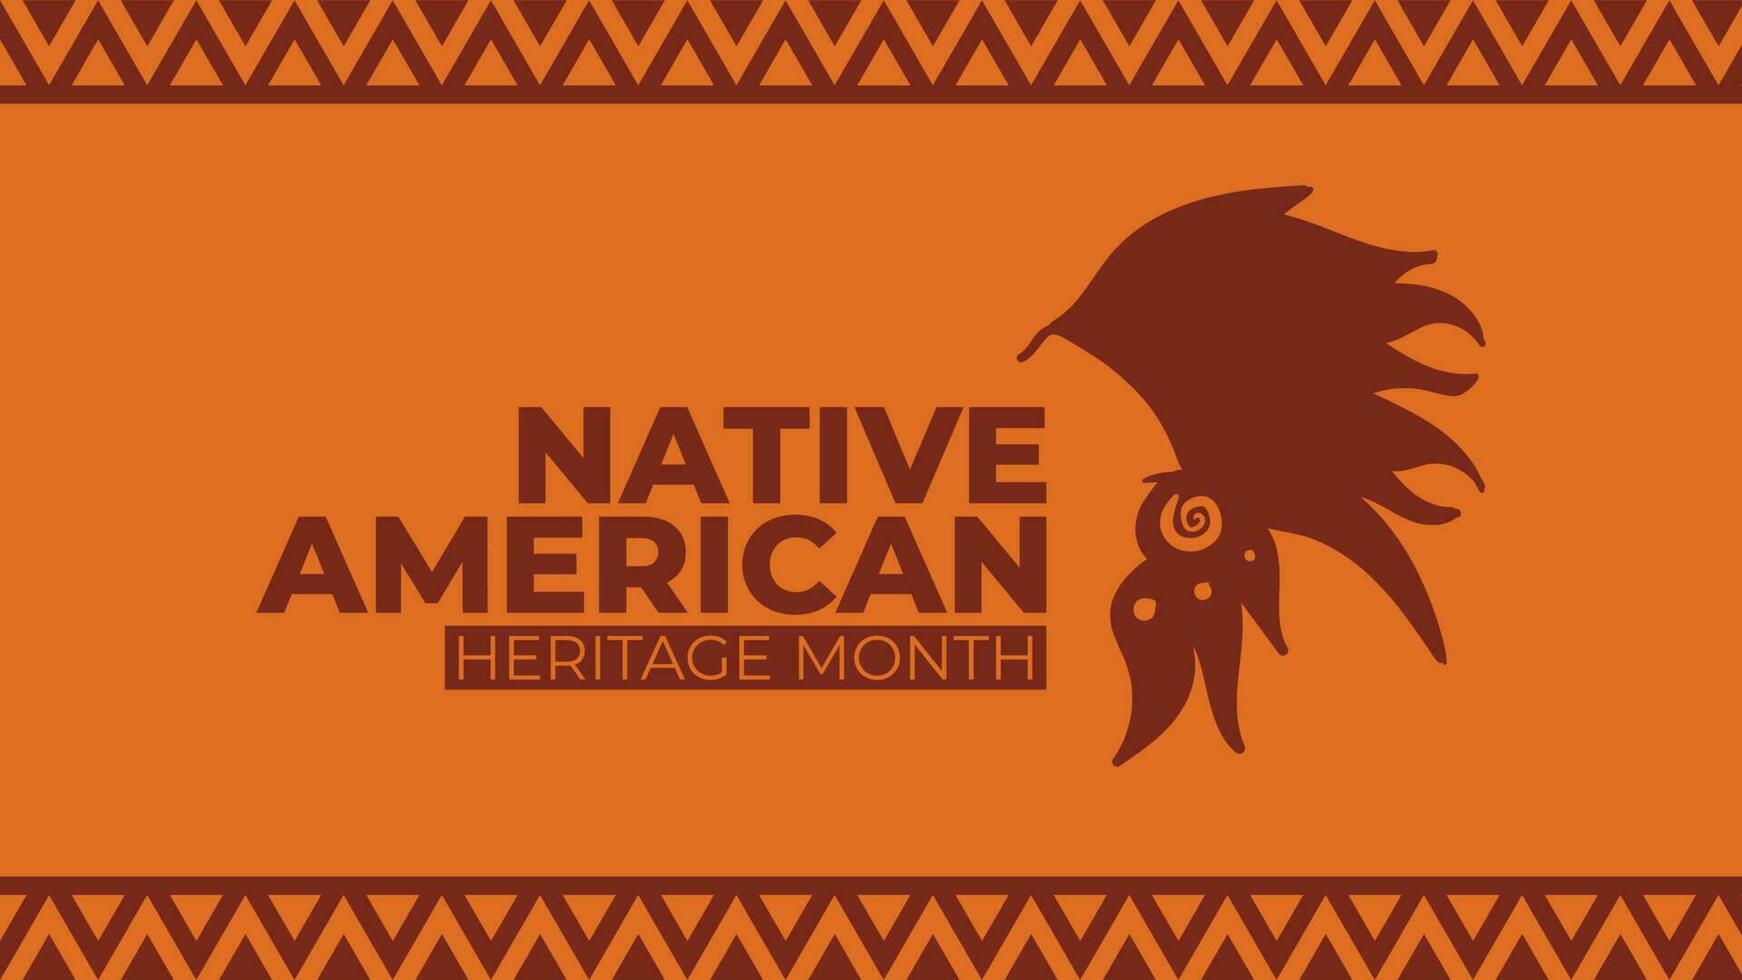 Native American Heritage Month is an annual designation observed in November. vector